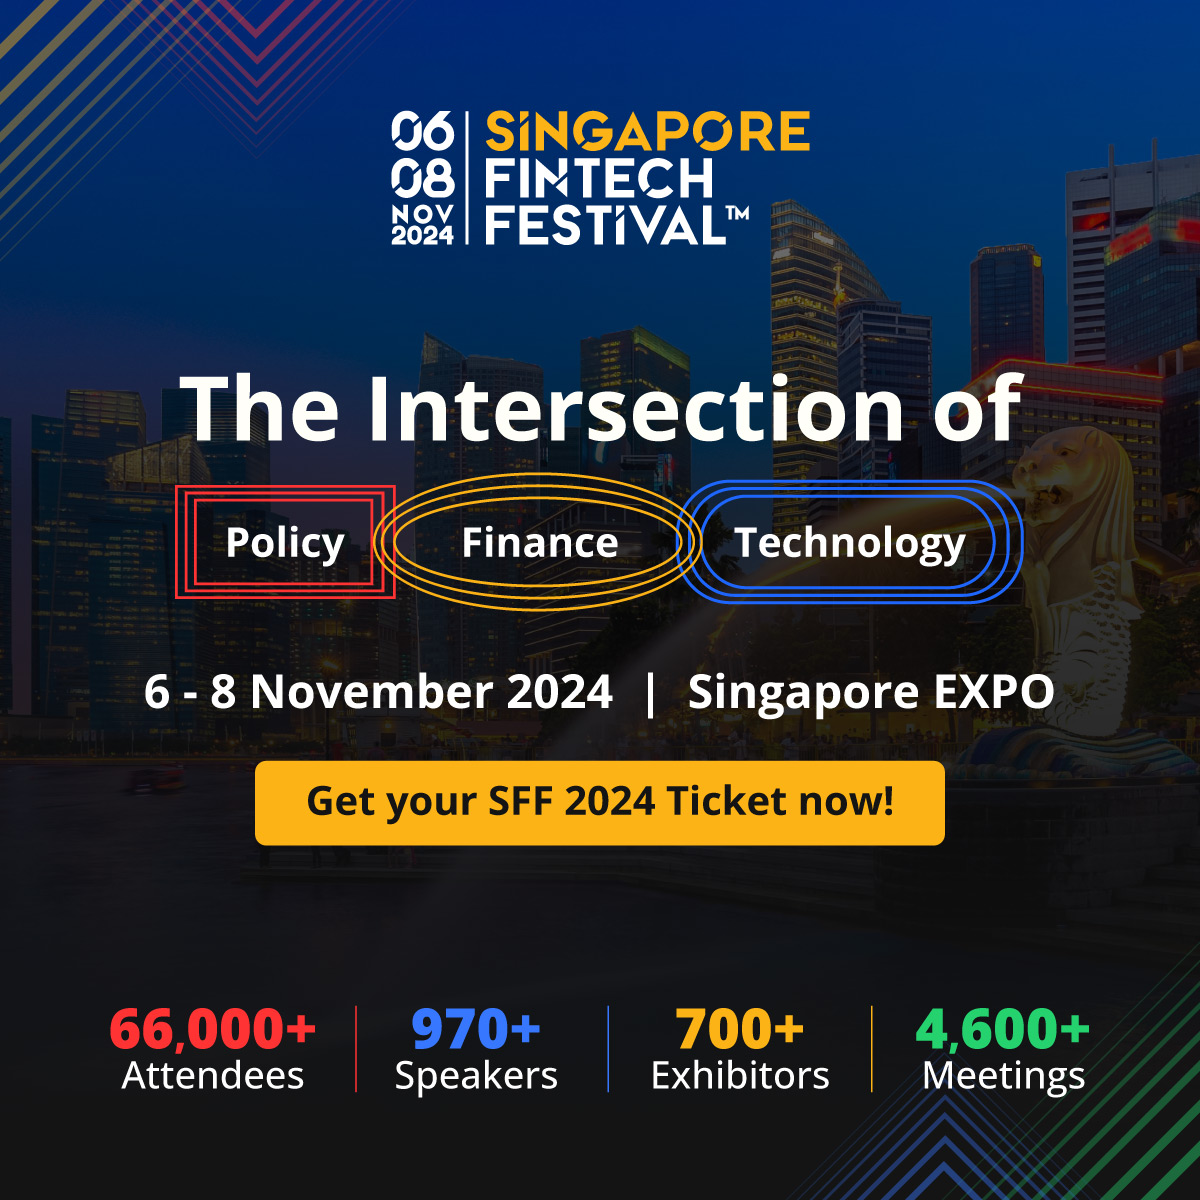 Join us at the Singapore FinTech Festival 2024 - Asia's premier fintech festival 🚀 Register now to be part of this unparalleled fintech experience: hubs.la/Q02thJtW0 #SFF2024